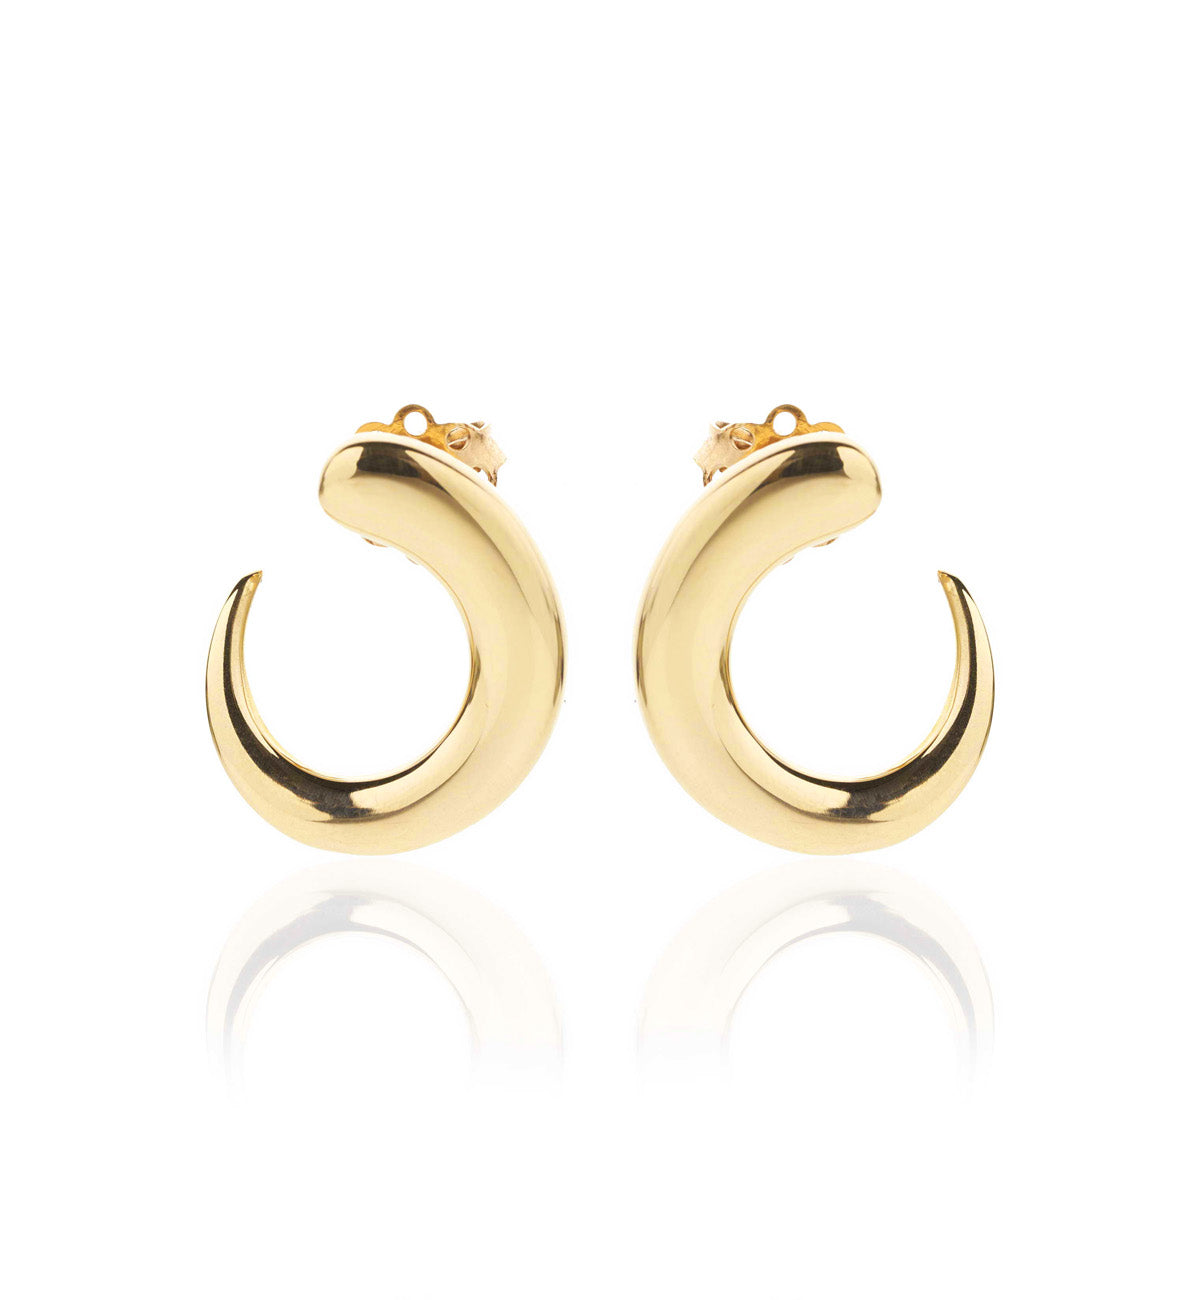 GOCCIOLINE COLLECTION EARRINGS - 18KT YELLOW GOLD